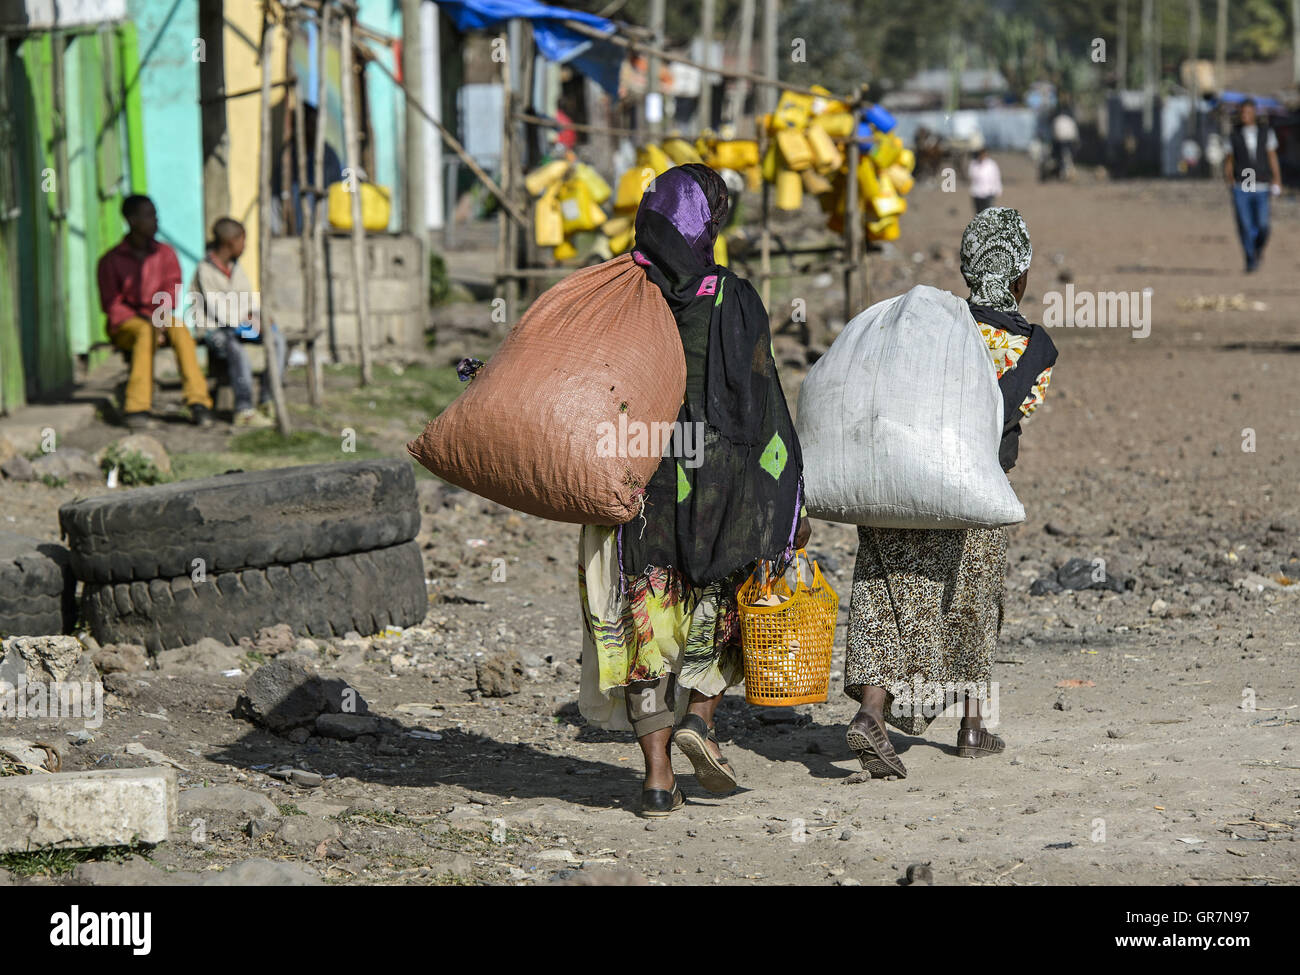 Two Women With Heavy Bags On The Way To The Local Market In Goba, Bale Region, Oromiya, Ethiopia Stock Photo